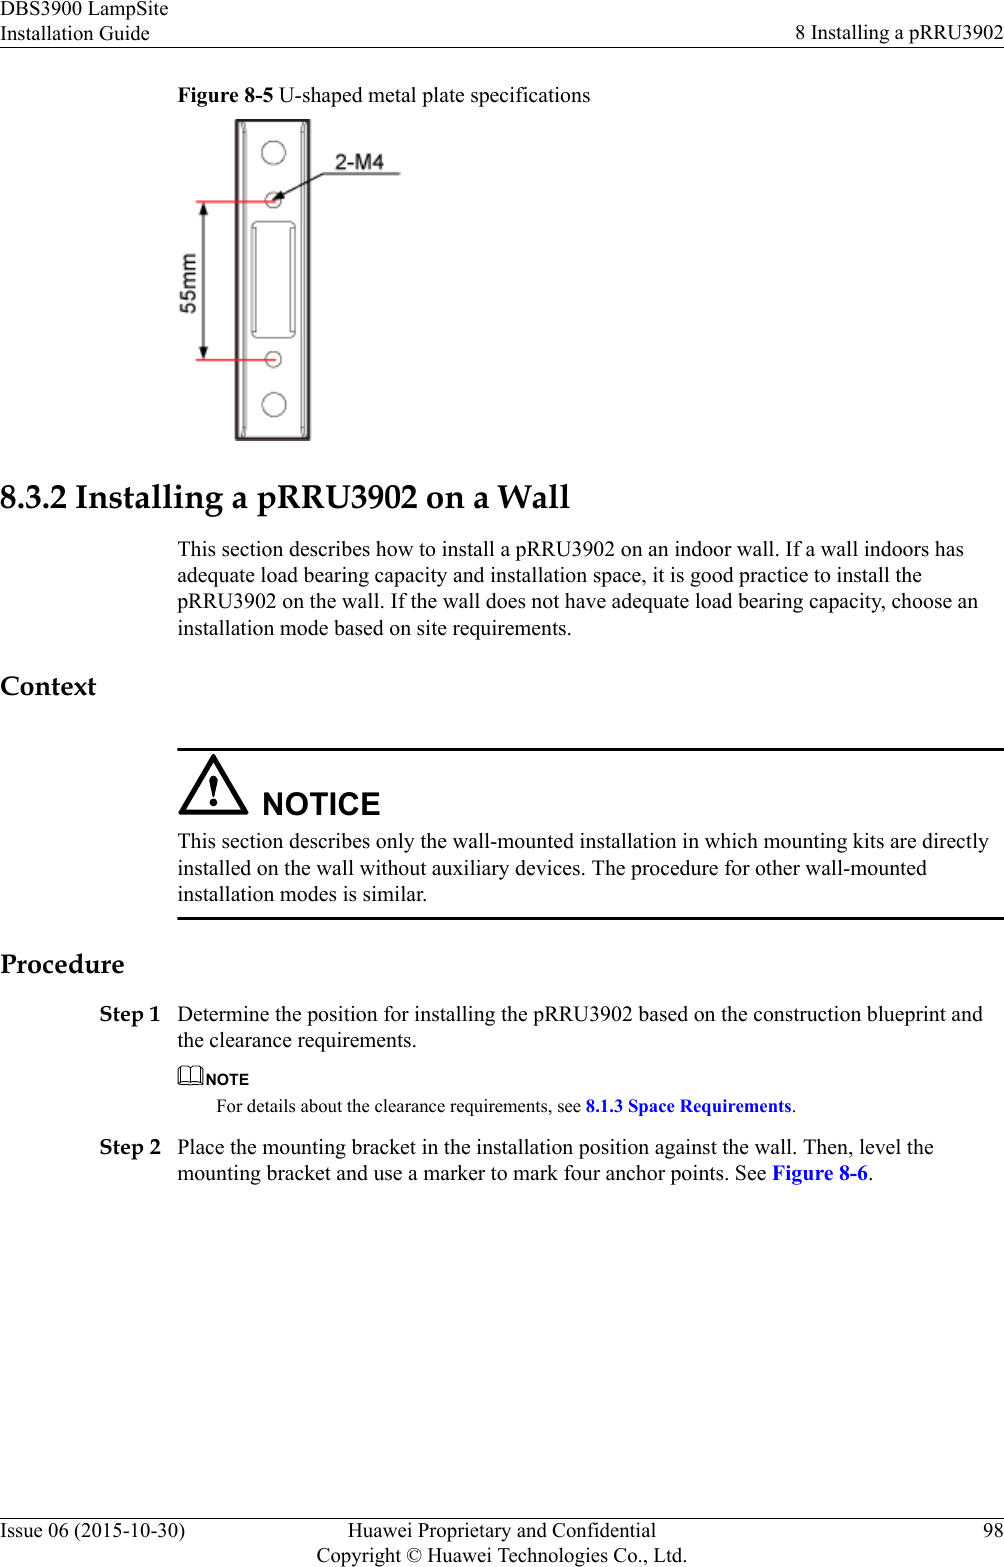 Figure 8-5 U-shaped metal plate specifications8.3.2 Installing a pRRU3902 on a WallThis section describes how to install a pRRU3902 on an indoor wall. If a wall indoors hasadequate load bearing capacity and installation space, it is good practice to install thepRRU3902 on the wall. If the wall does not have adequate load bearing capacity, choose aninstallation mode based on site requirements.ContextNOTICEThis section describes only the wall-mounted installation in which mounting kits are directlyinstalled on the wall without auxiliary devices. The procedure for other wall-mountedinstallation modes is similar.ProcedureStep 1 Determine the position for installing the pRRU3902 based on the construction blueprint andthe clearance requirements.NOTEFor details about the clearance requirements, see 8.1.3 Space Requirements.Step 2 Place the mounting bracket in the installation position against the wall. Then, level themounting bracket and use a marker to mark four anchor points. See Figure 8-6.DBS3900 LampSiteInstallation Guide 8 Installing a pRRU3902Issue 06 (2015-10-30) Huawei Proprietary and ConfidentialCopyright © Huawei Technologies Co., Ltd.98